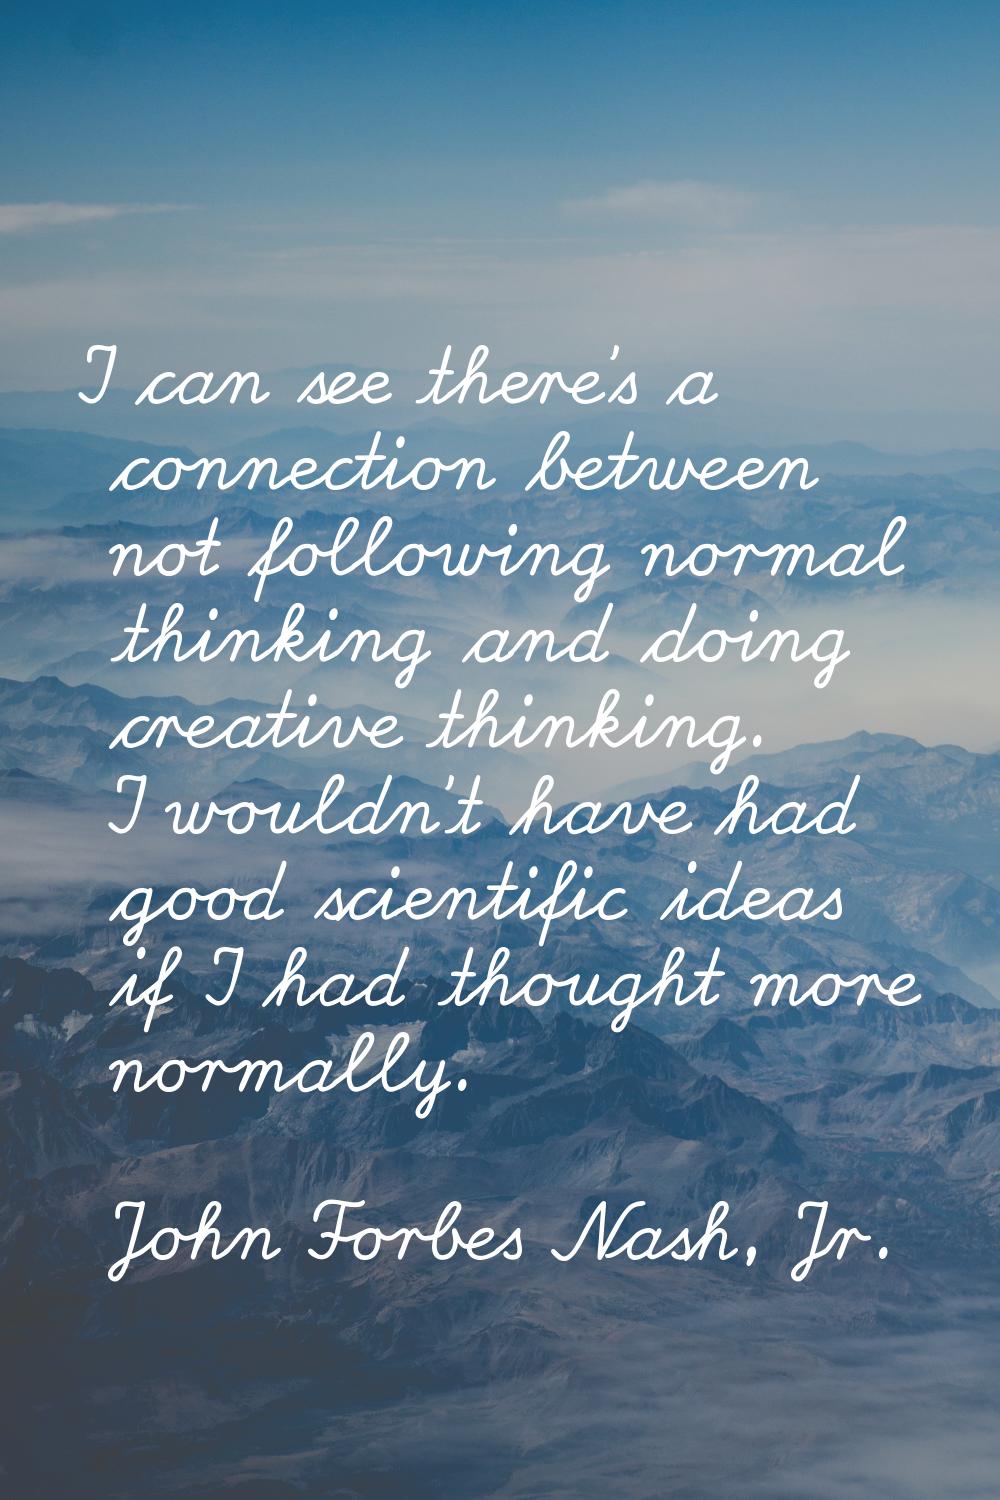 I can see there's a connection between not following normal thinking and doing creative thinking. I